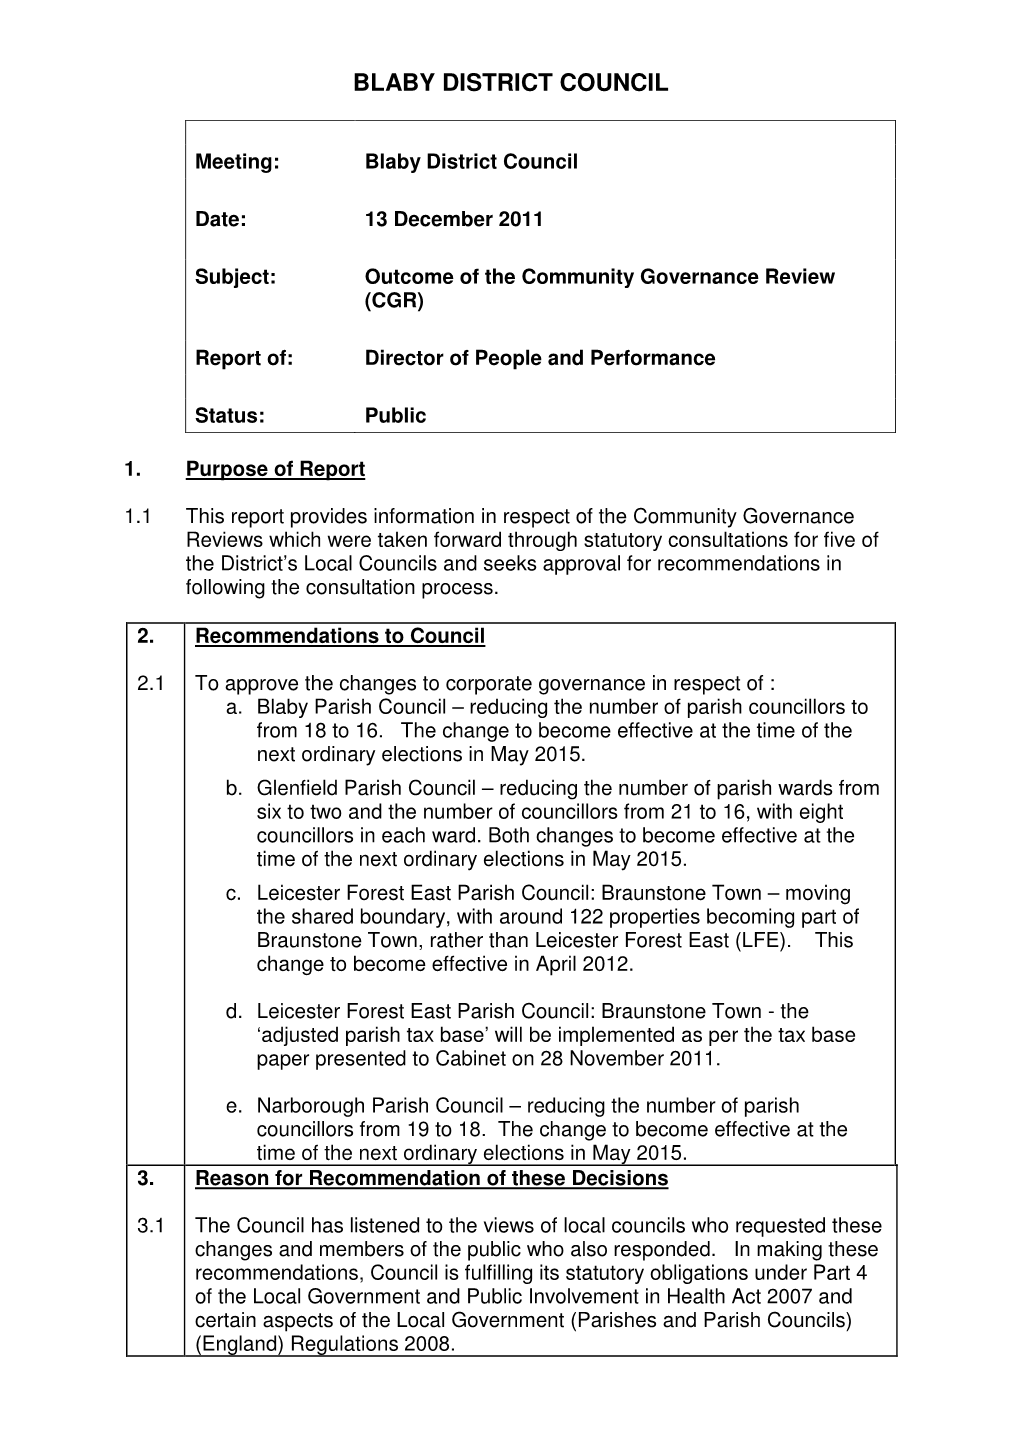 R1 Outcome of CGR Consultations PDF 138 KB